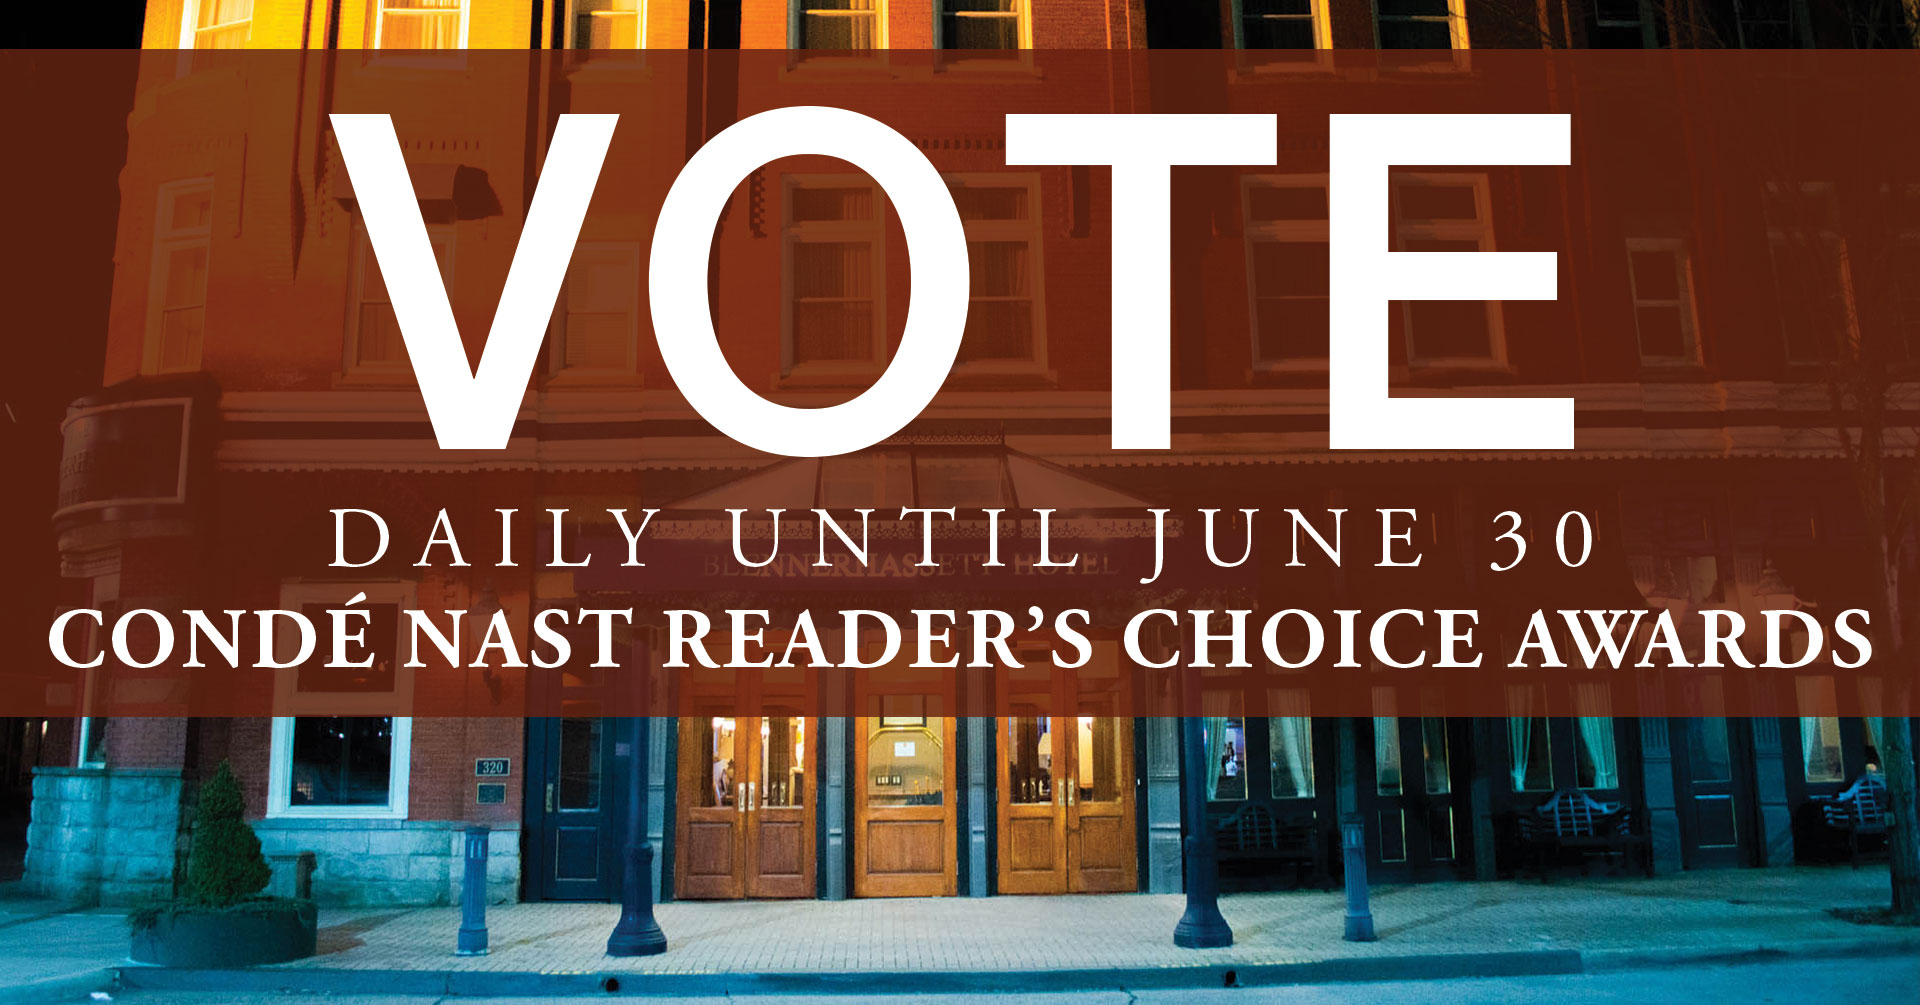 Vote Daily until June 30 - Condé Nast Reader's Choice Awards